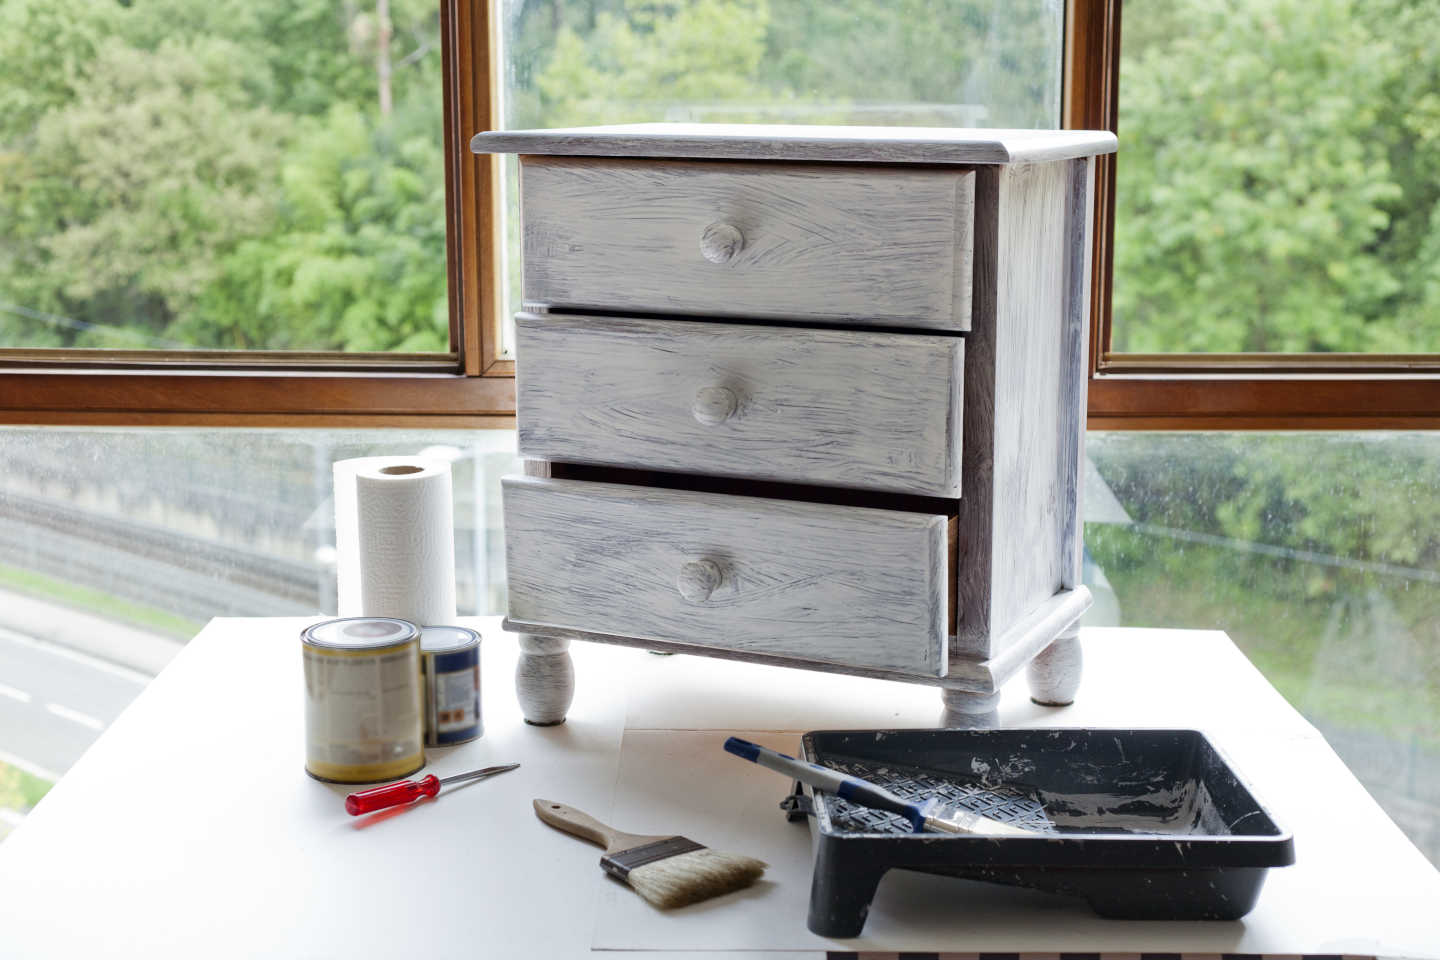 Painting drawers